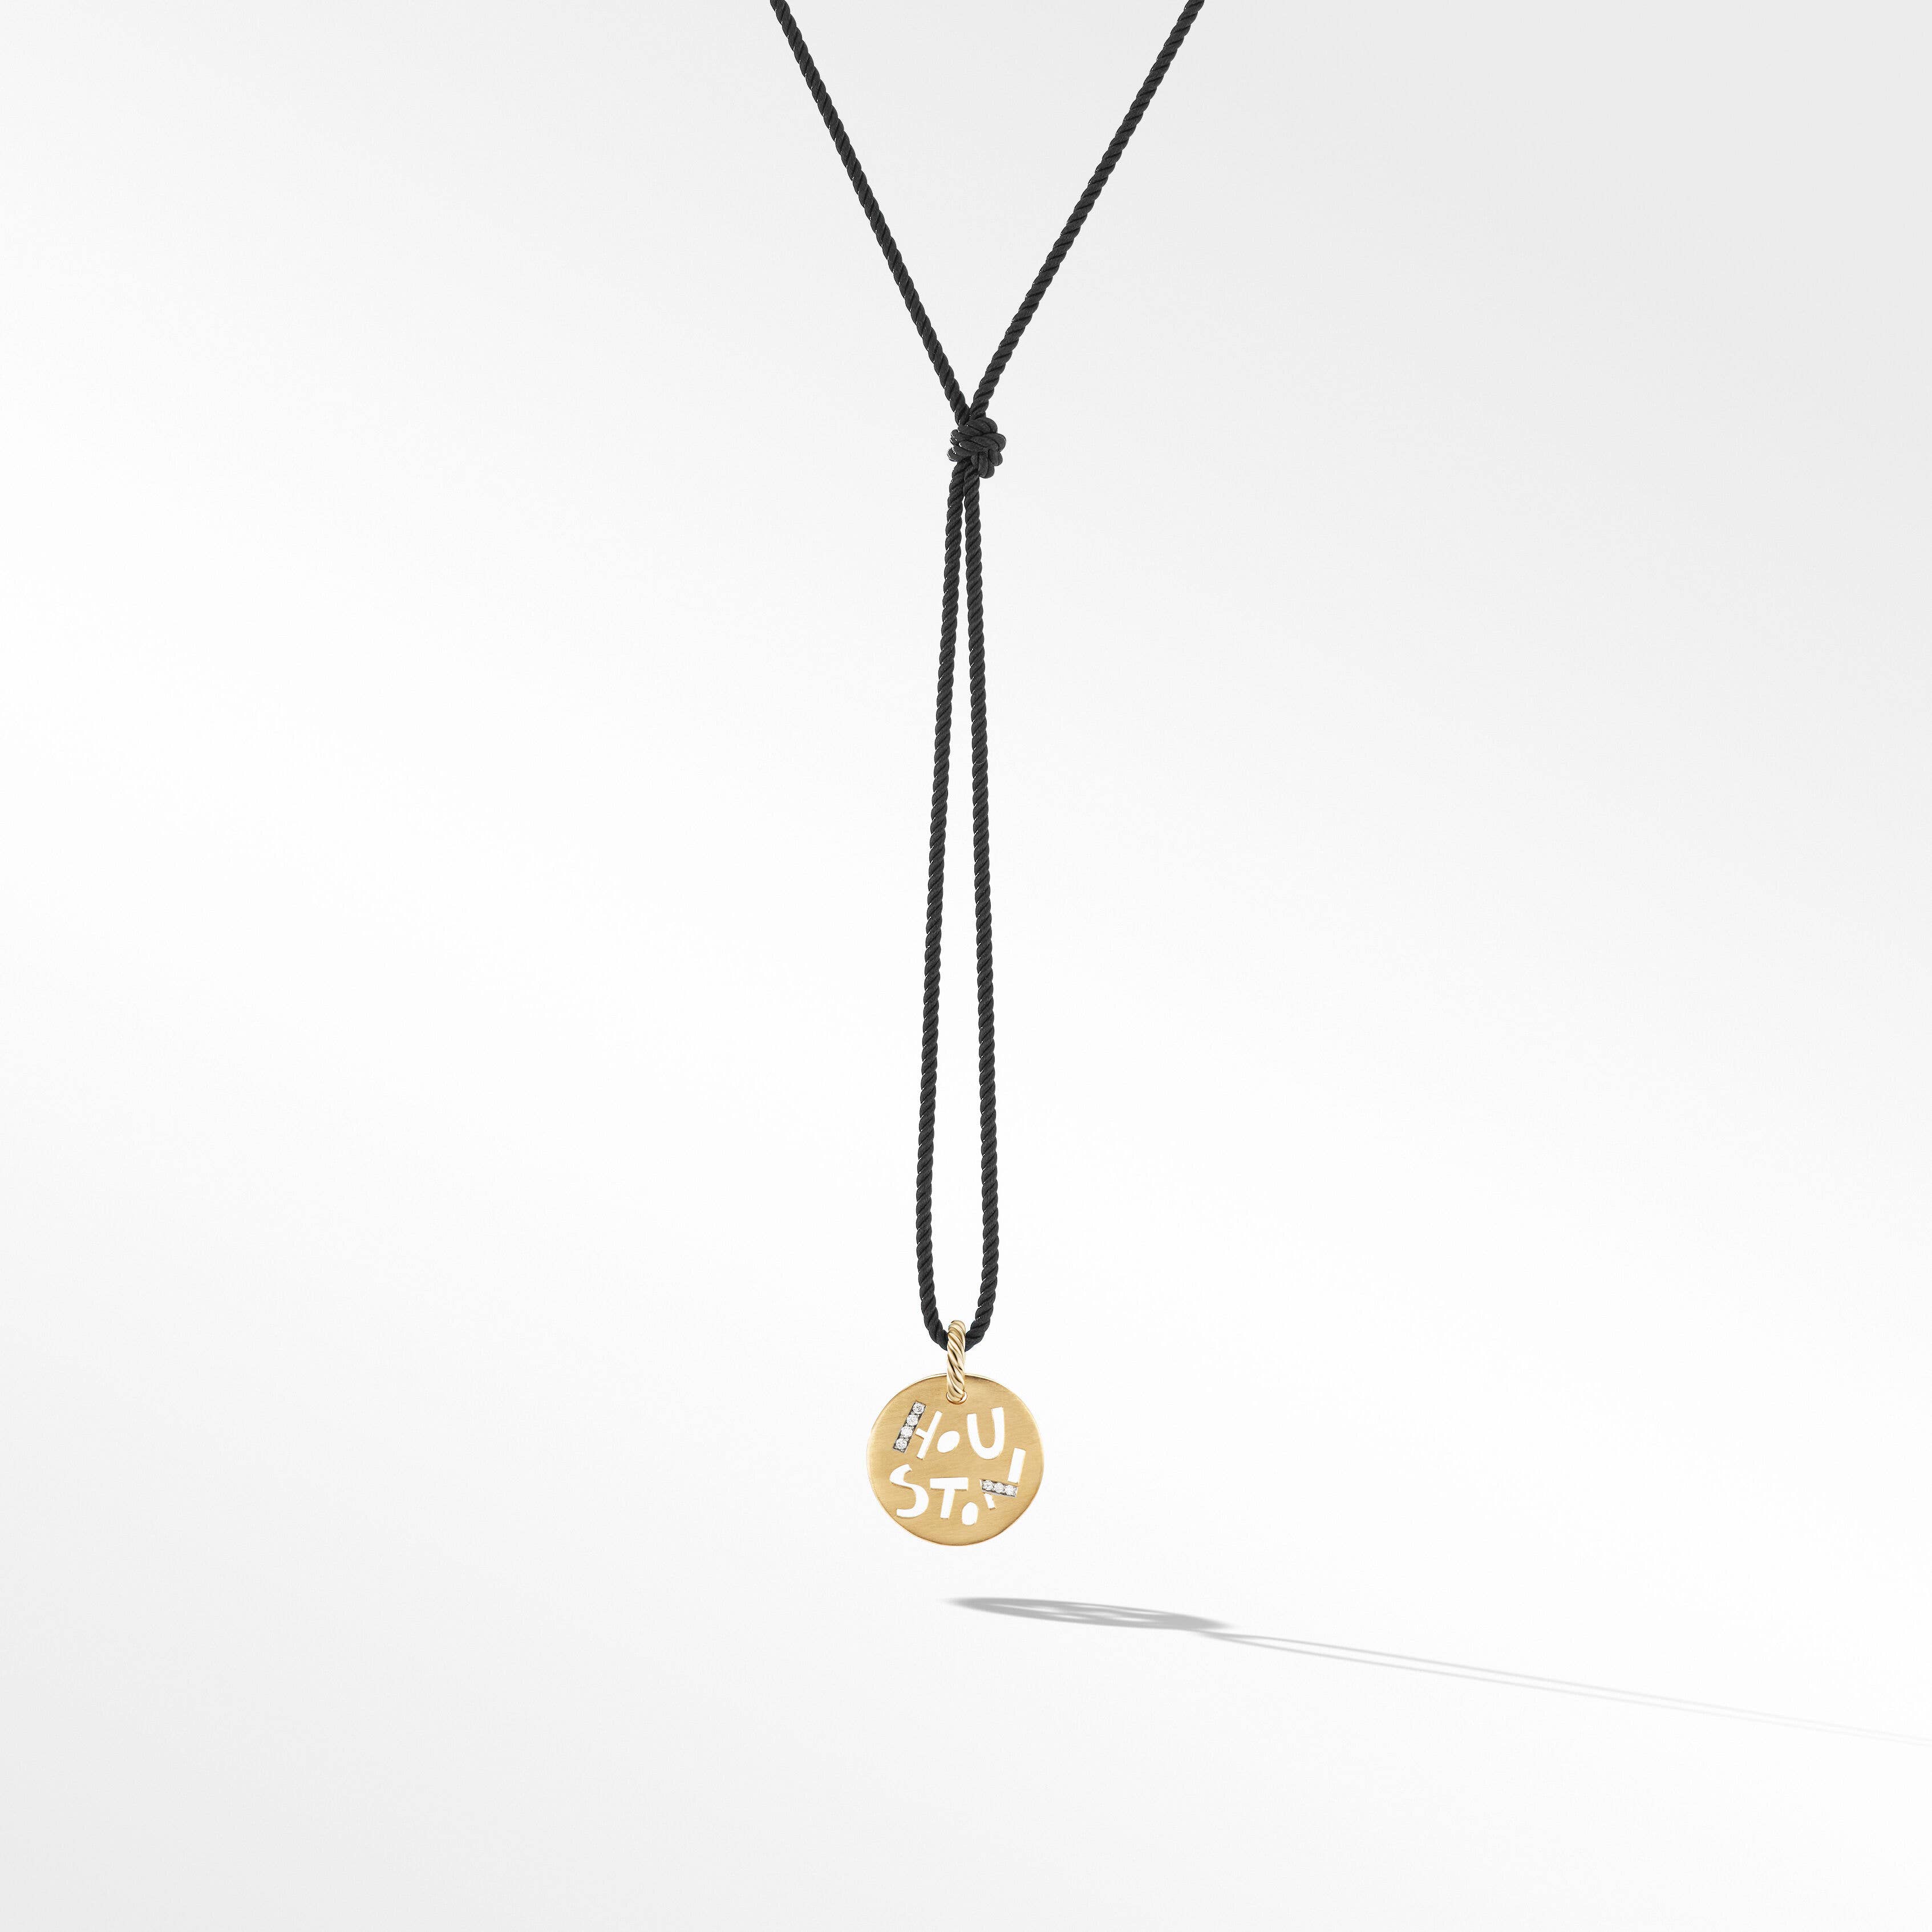 DY Elements® Houston Pendant Necklace in 18K Yellow Gold with Diamonds